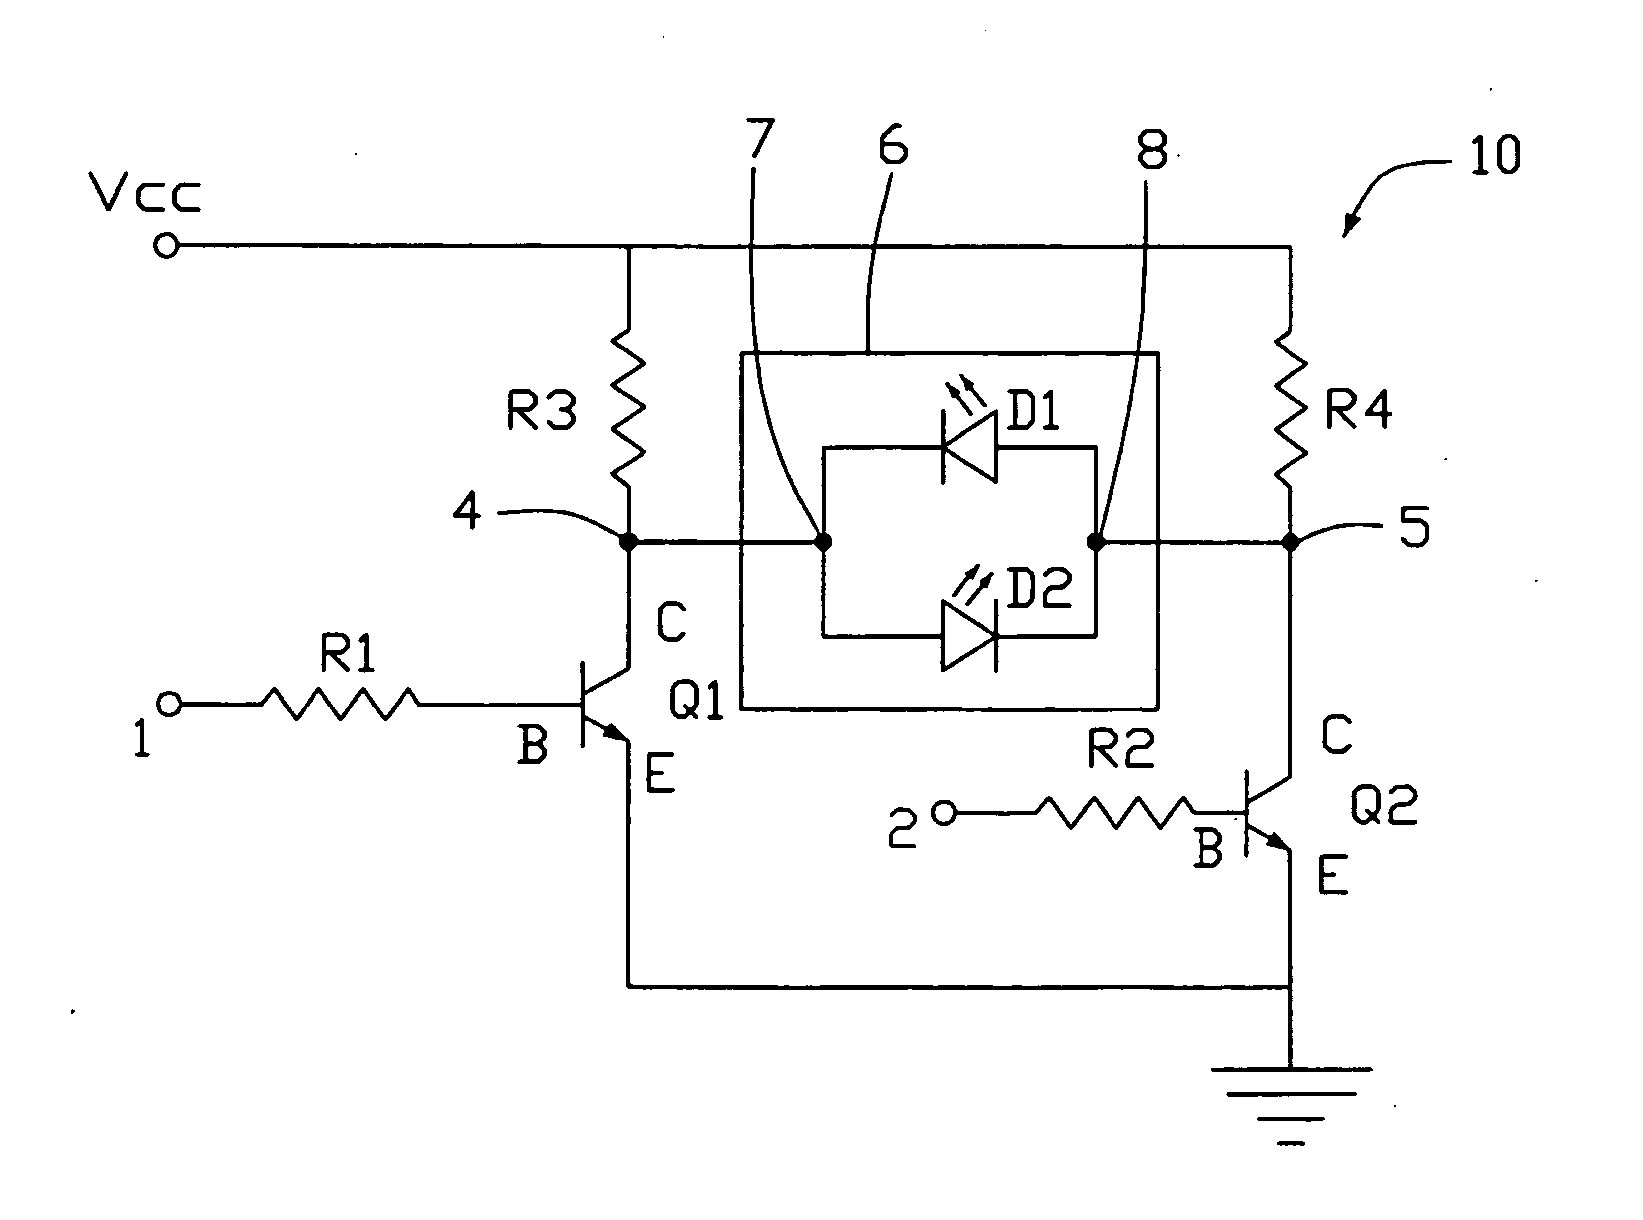 Drive circuit of computer system for driving a mode indicator